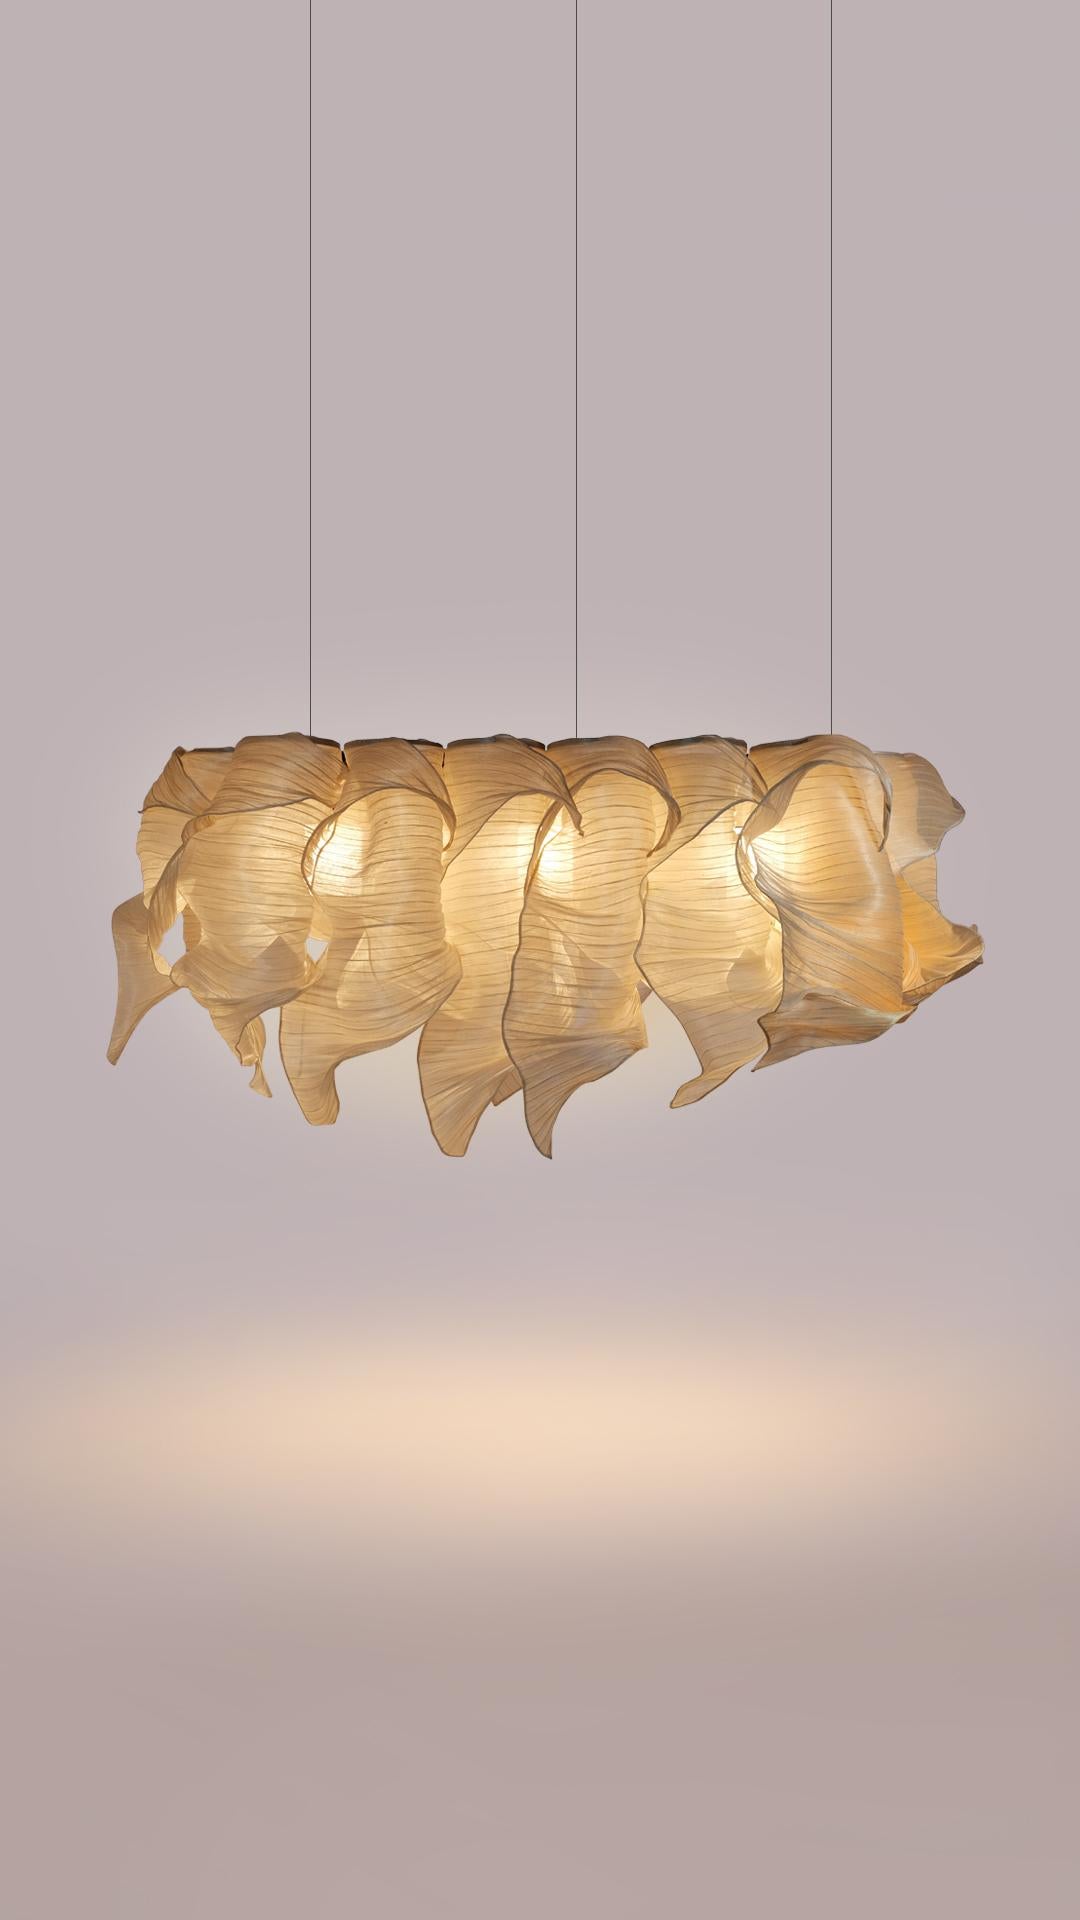 Providing soft light in an organic and unique design, the Nebula Pendant Chandelier draws its inspiration from the interstellar clouds of dust and gas. Entirely handcrafted of Banaca (banana-abaca), a fiber from the Philippines woven by a community